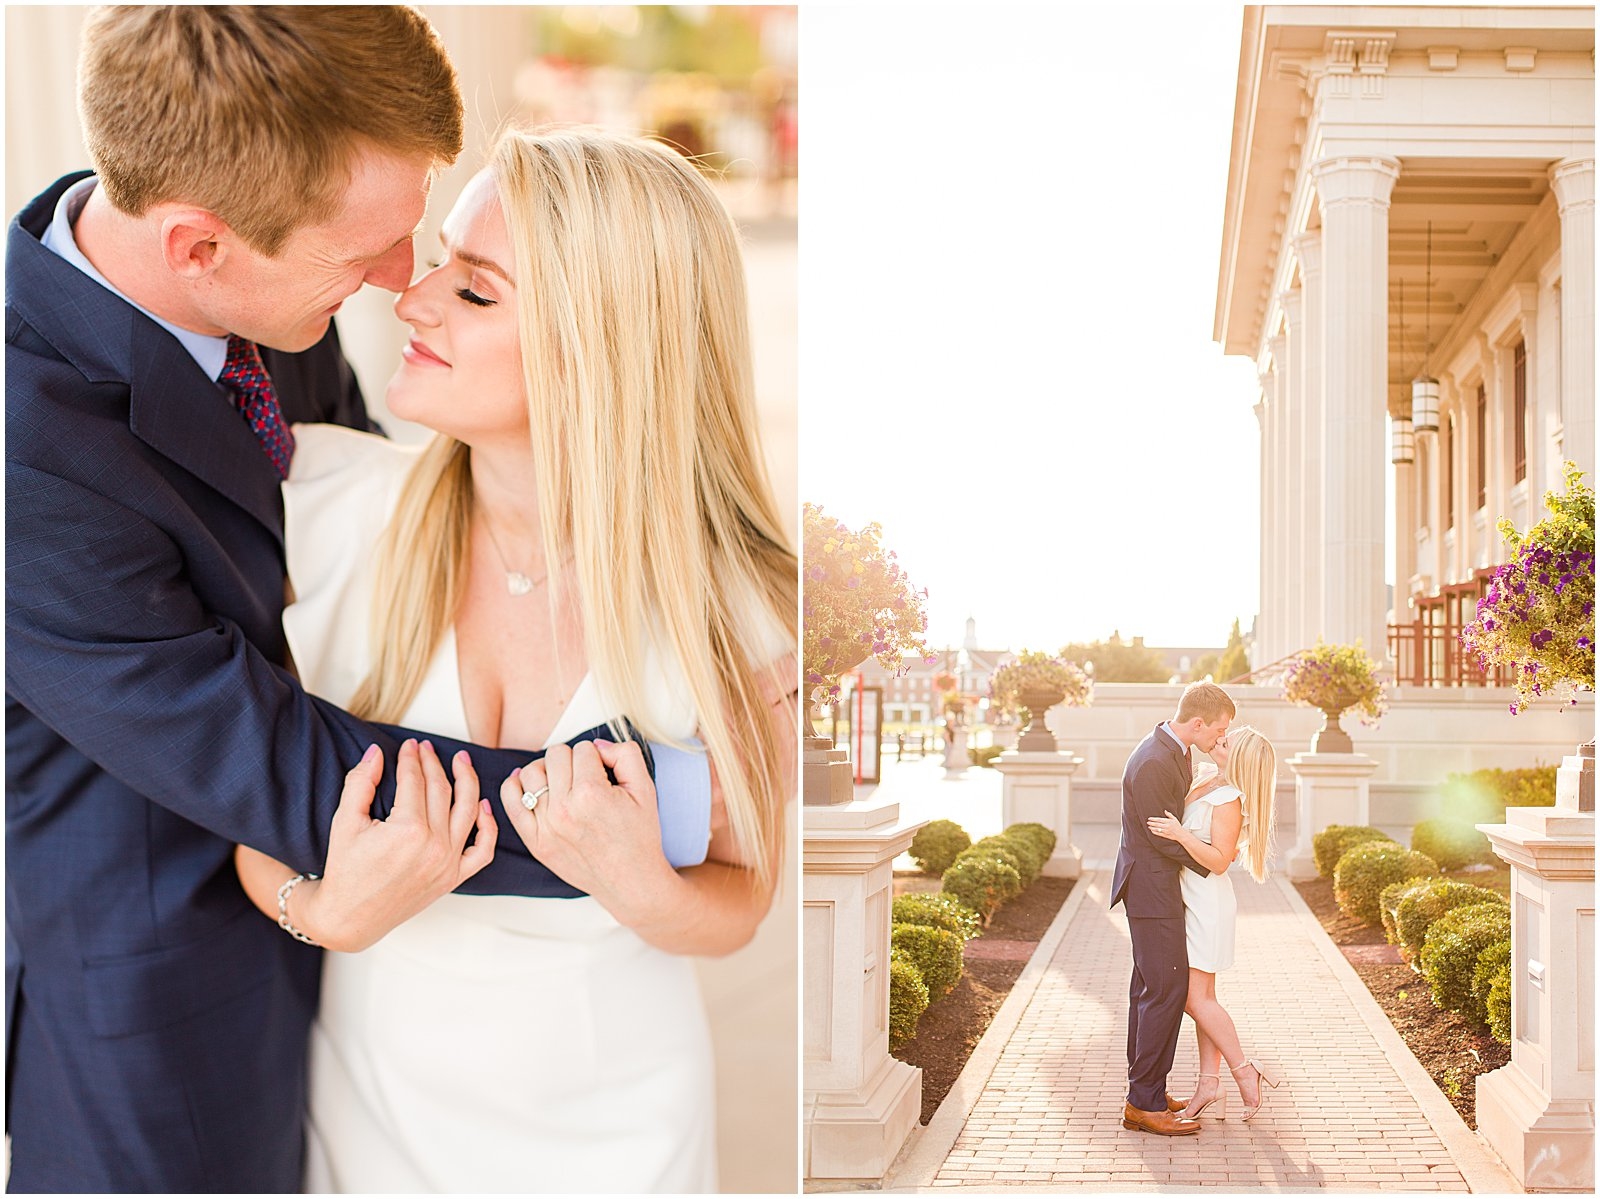 A Cute and Cuddly Engagement Session in Carmel, IN | Abbi and Josh0034.jpg